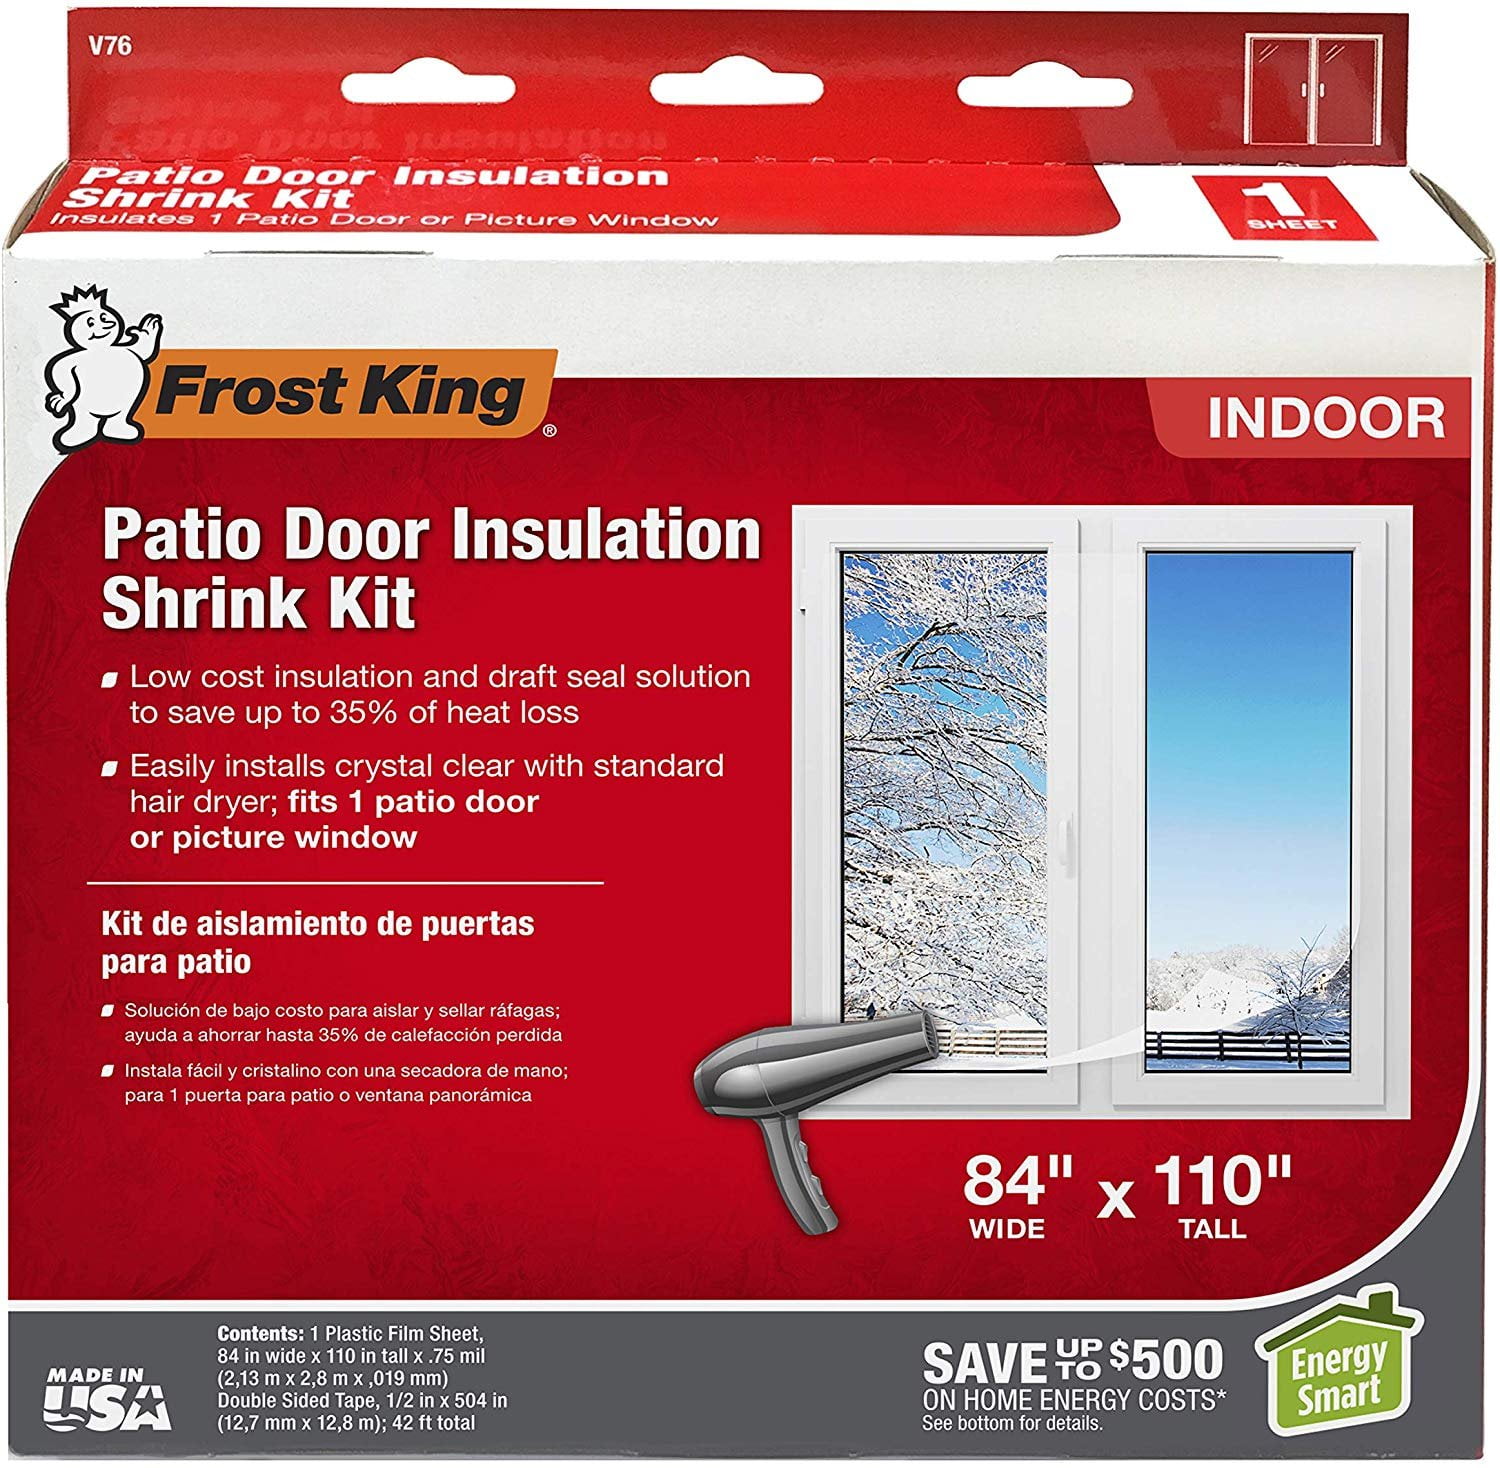 New Frost King Patio Door Insulation Kit Shrink Film up to 110"x 84" 